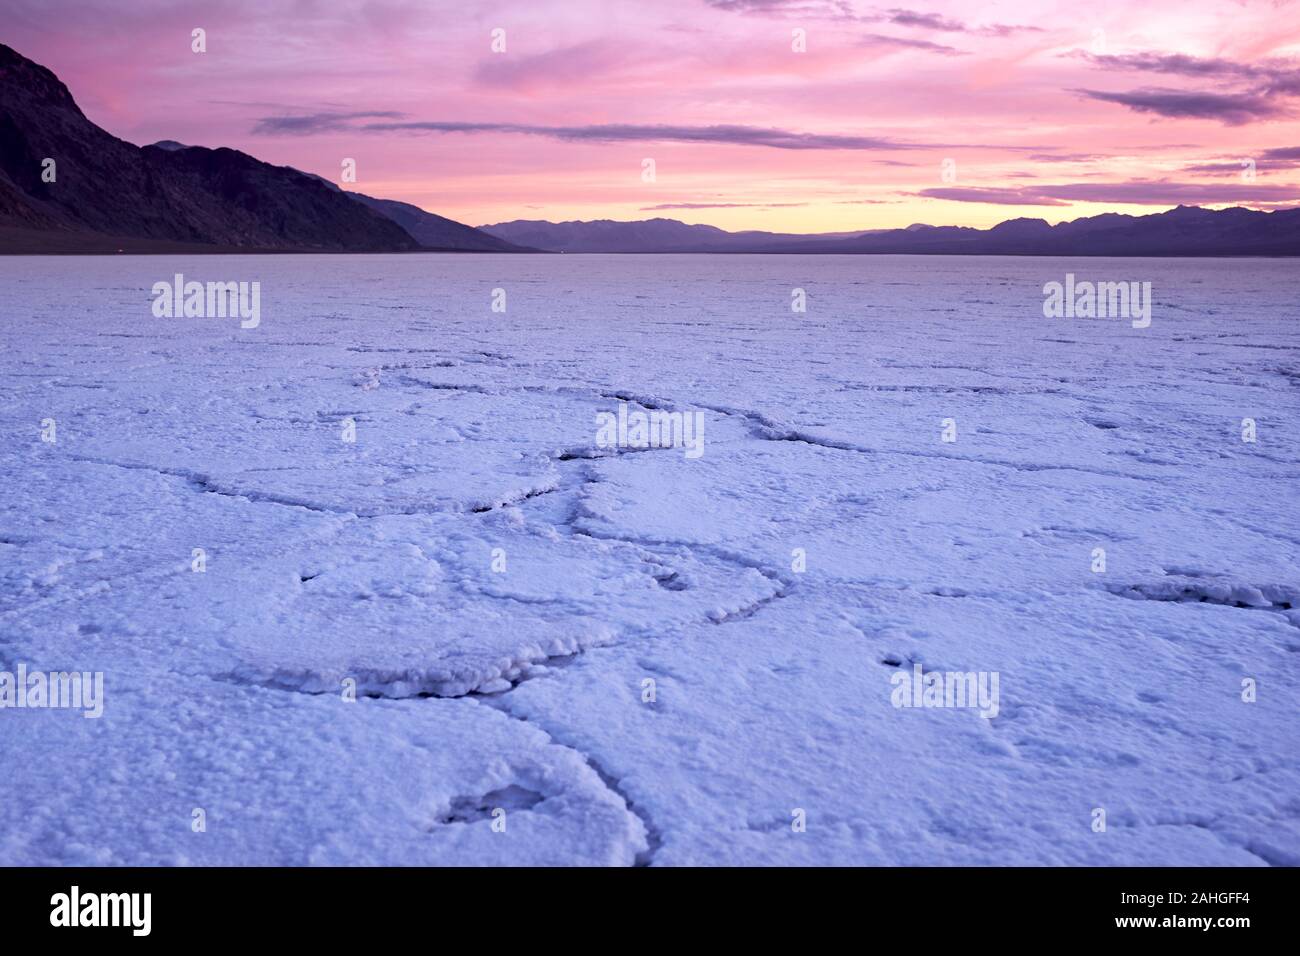 Bad Water Salt Flats in Death Valley, California, USA Stock Photo